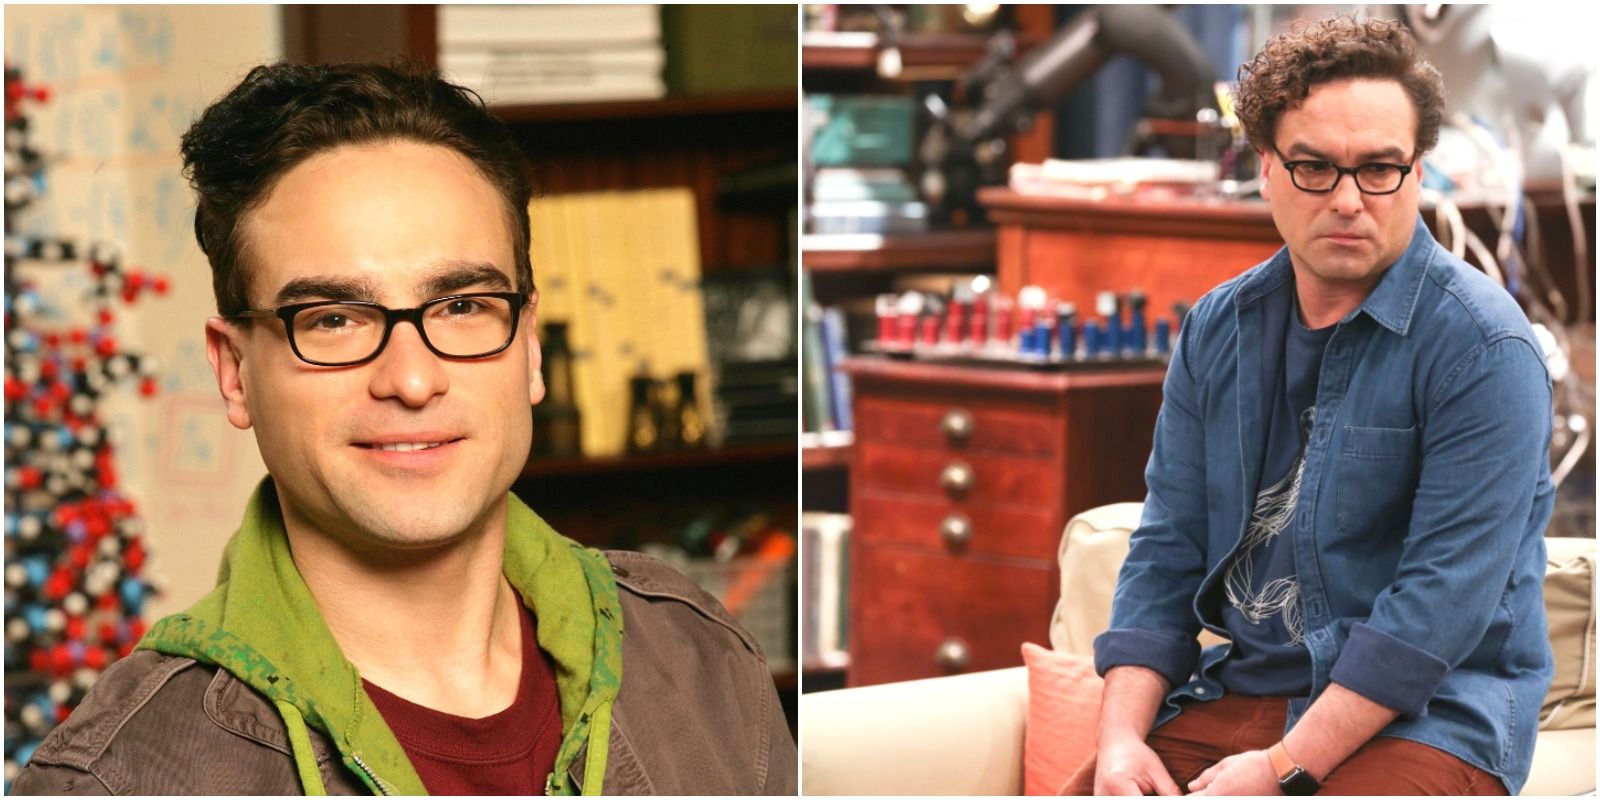 Younger and older versions of Leonard from the Big Bang Theory